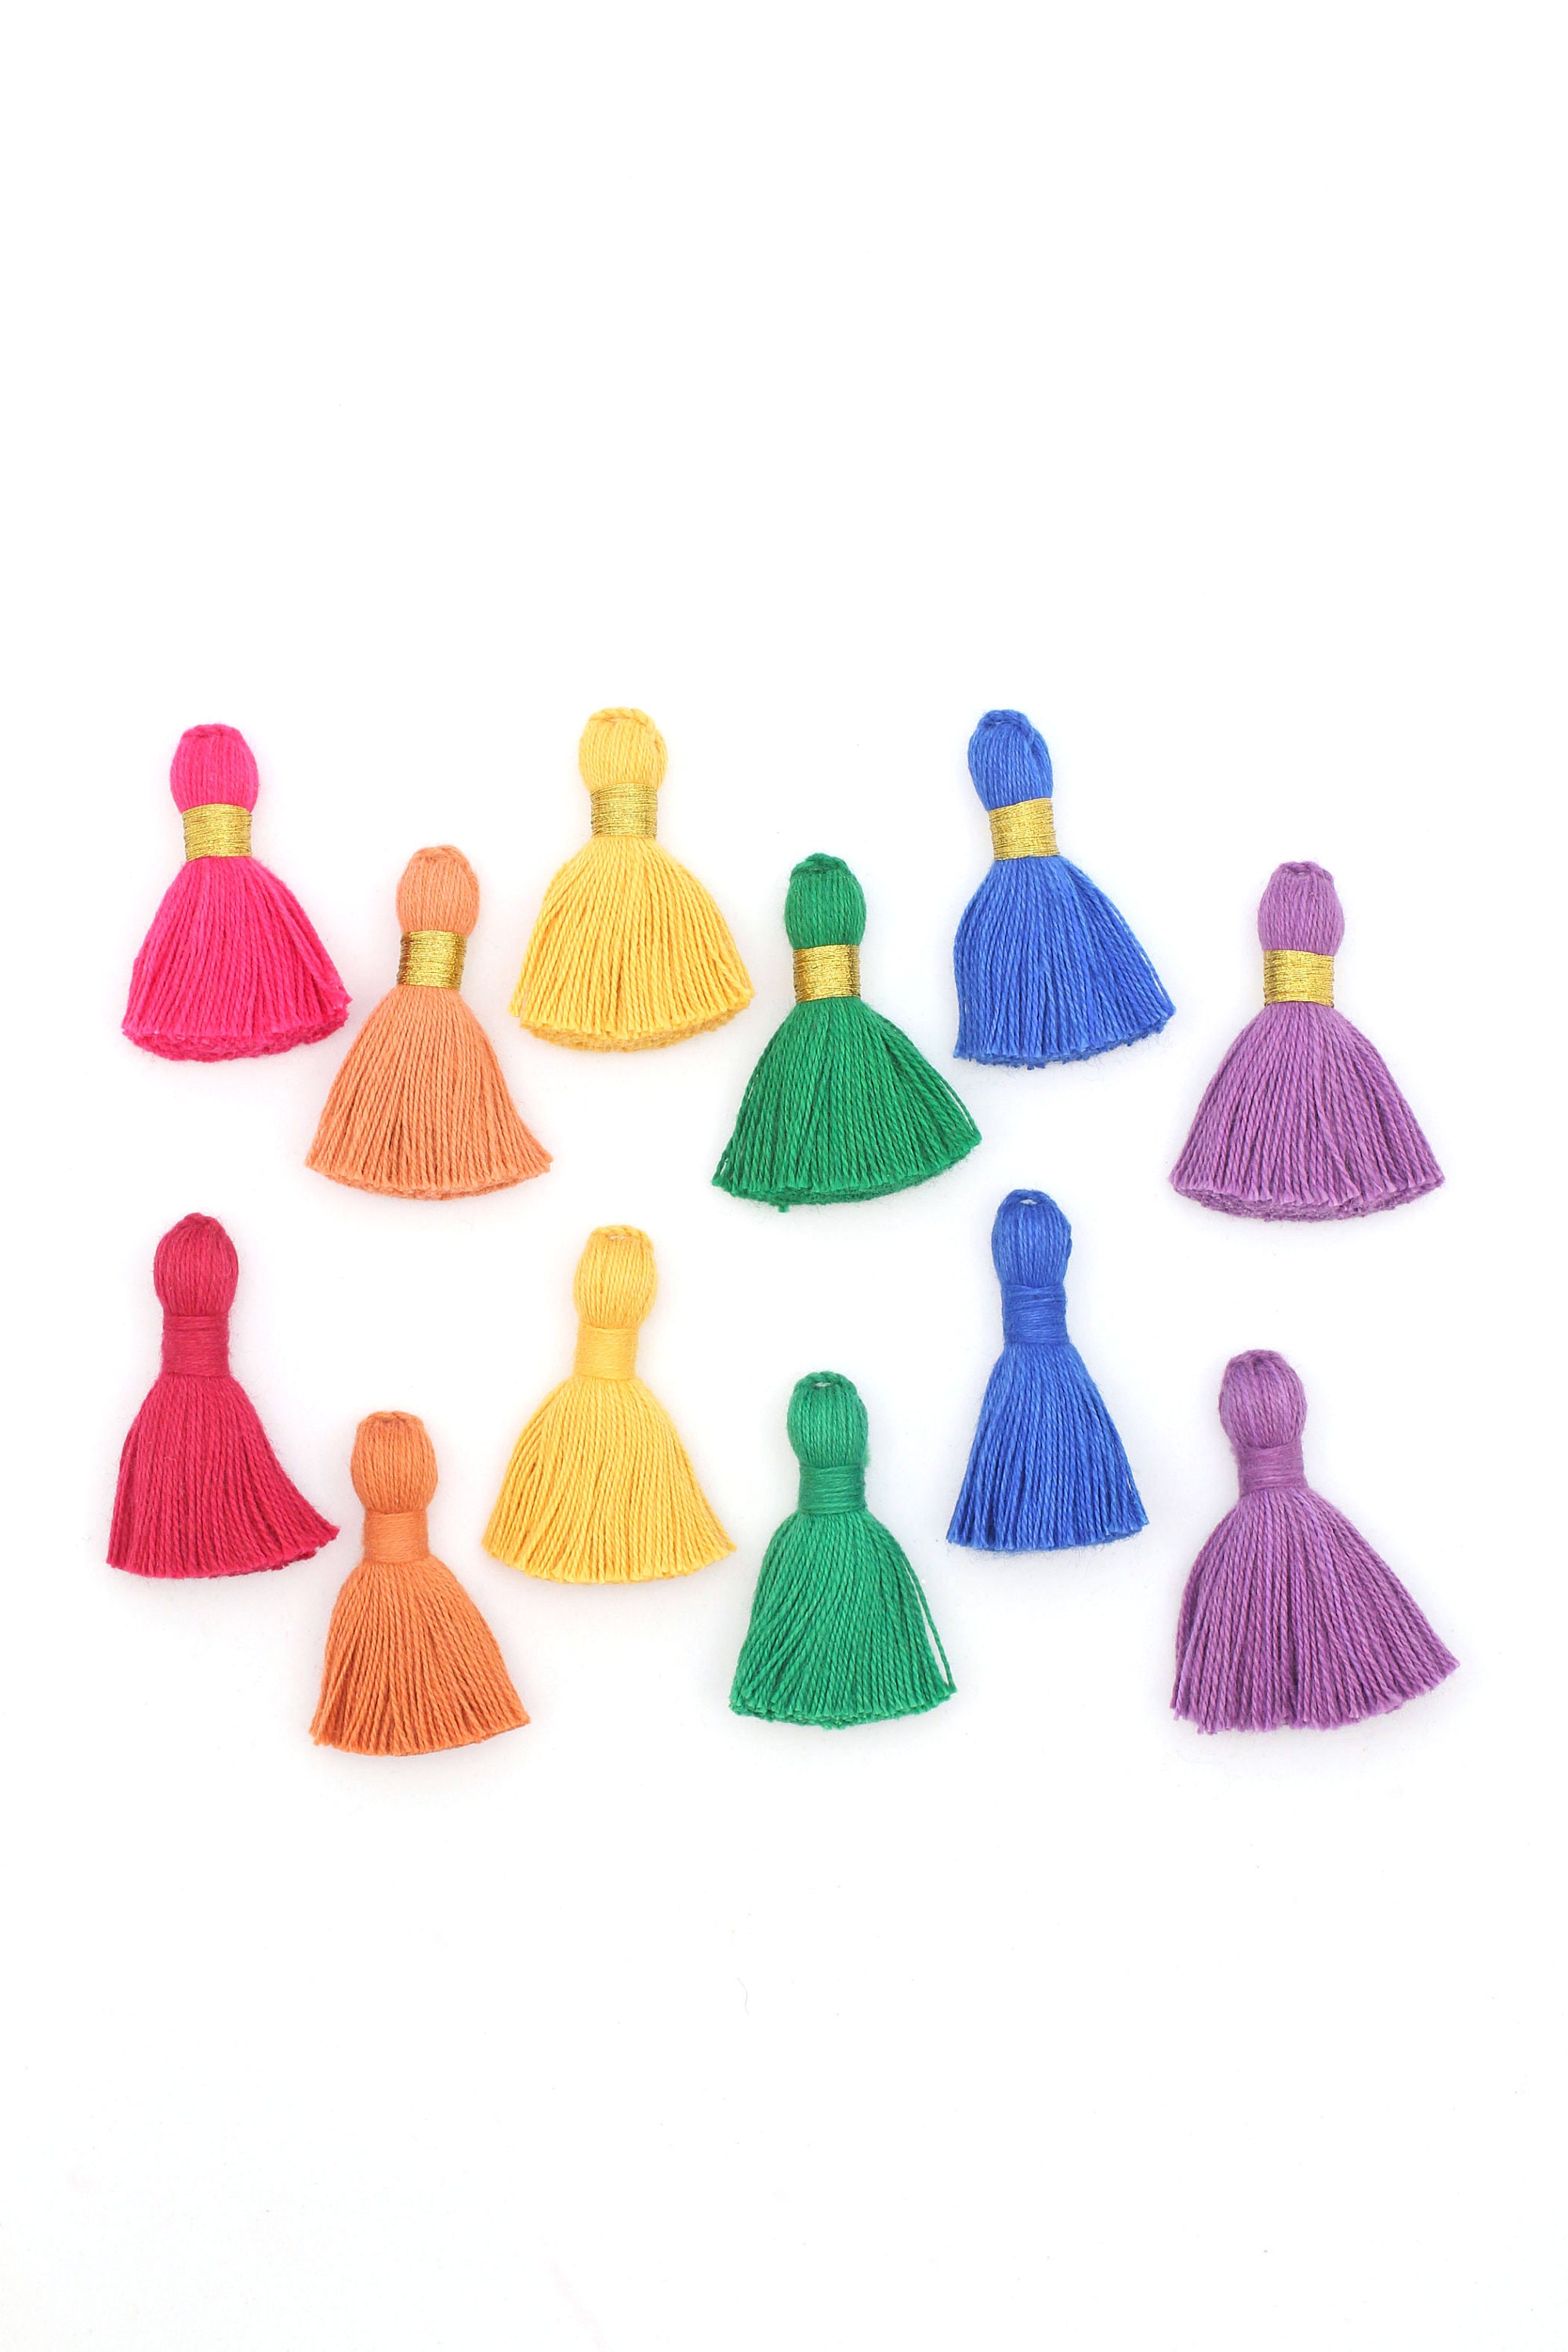 Primary Colors Mix Mini Tassels with Gold Binding, Jewelry Making, 1.2